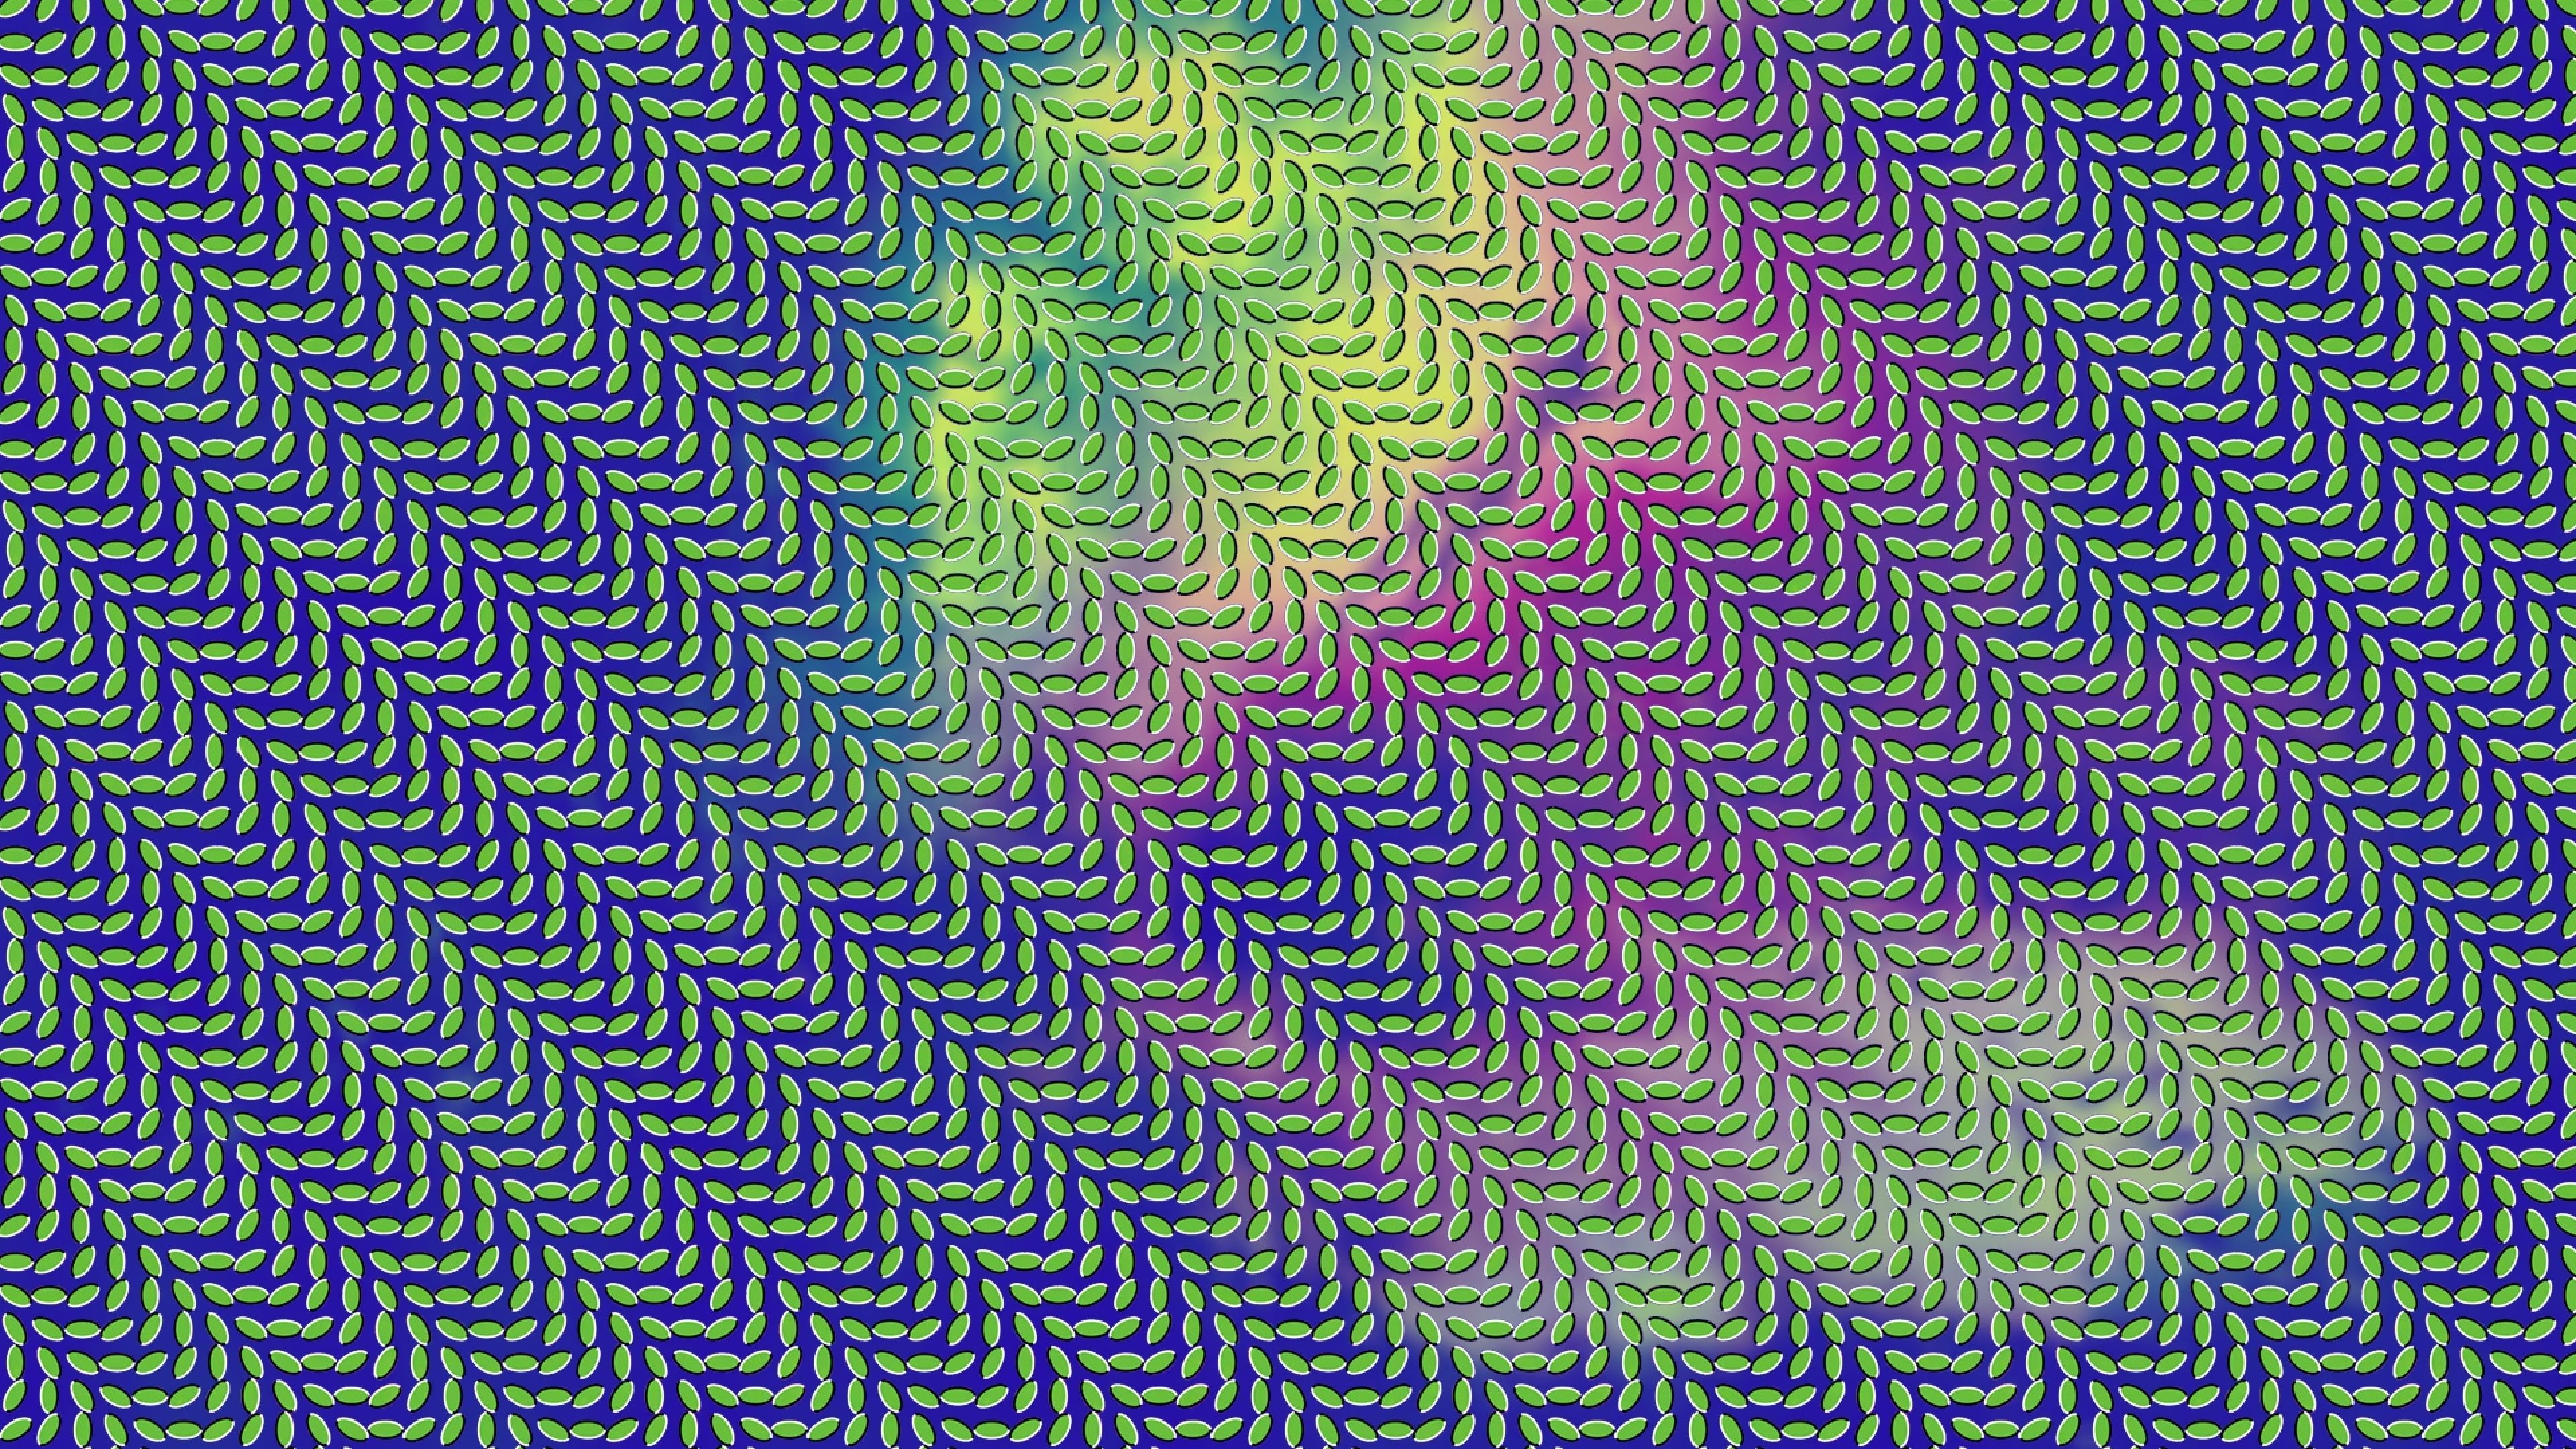 Optical Illusion 4K Wallpapers - Top Free Optical Illusion 4K Backgrounds 3840x2160